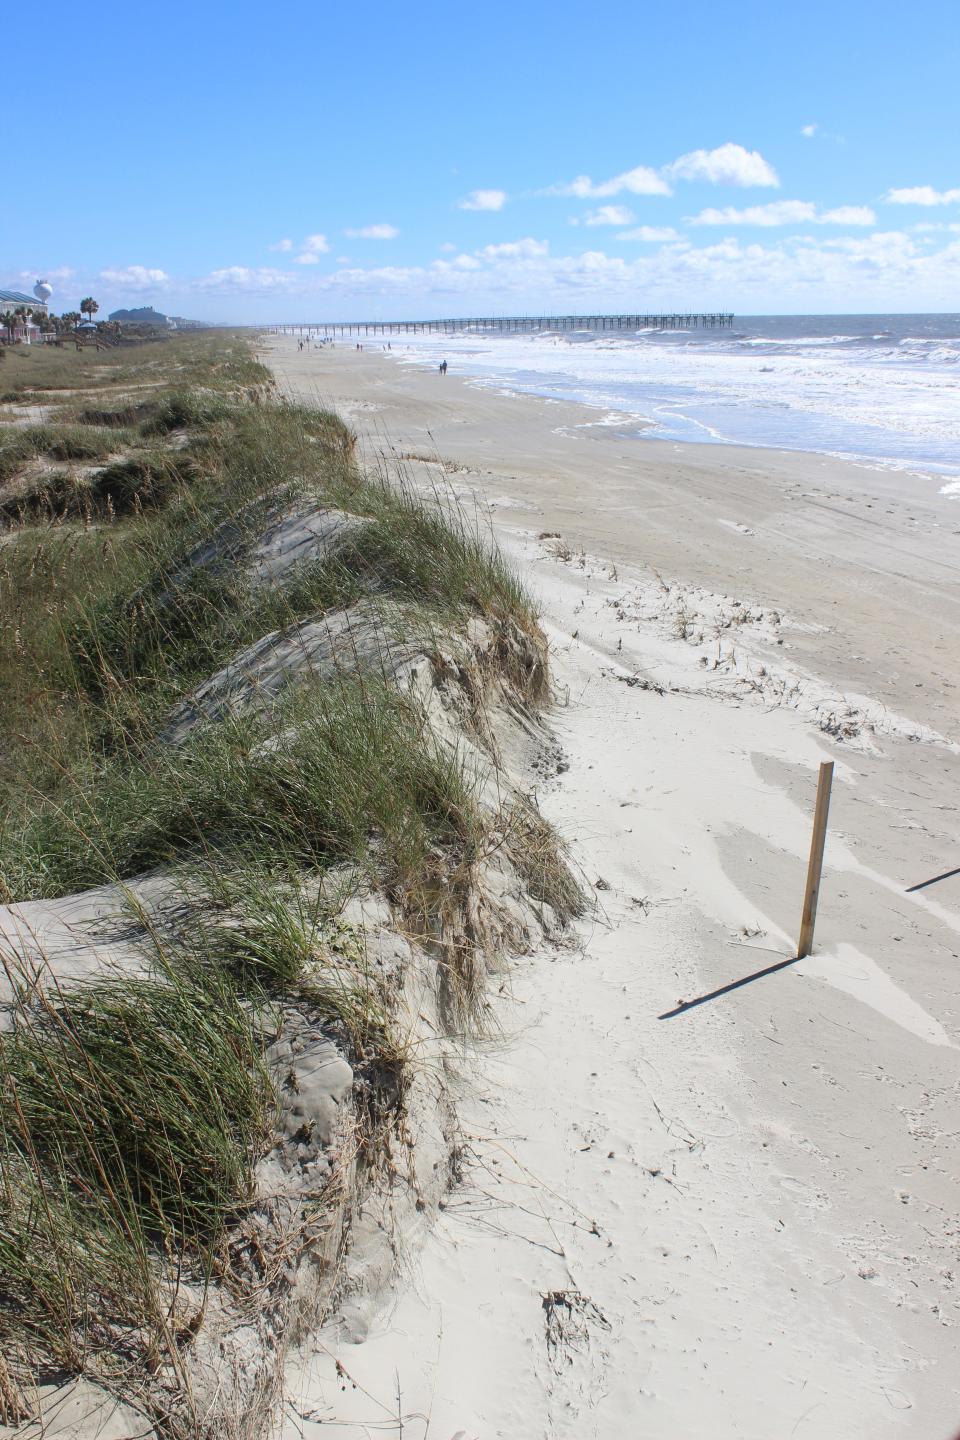 On Saturday, October 1, beach erosion at Ocean Isle was evident from Hurricane Ian's storm surge.